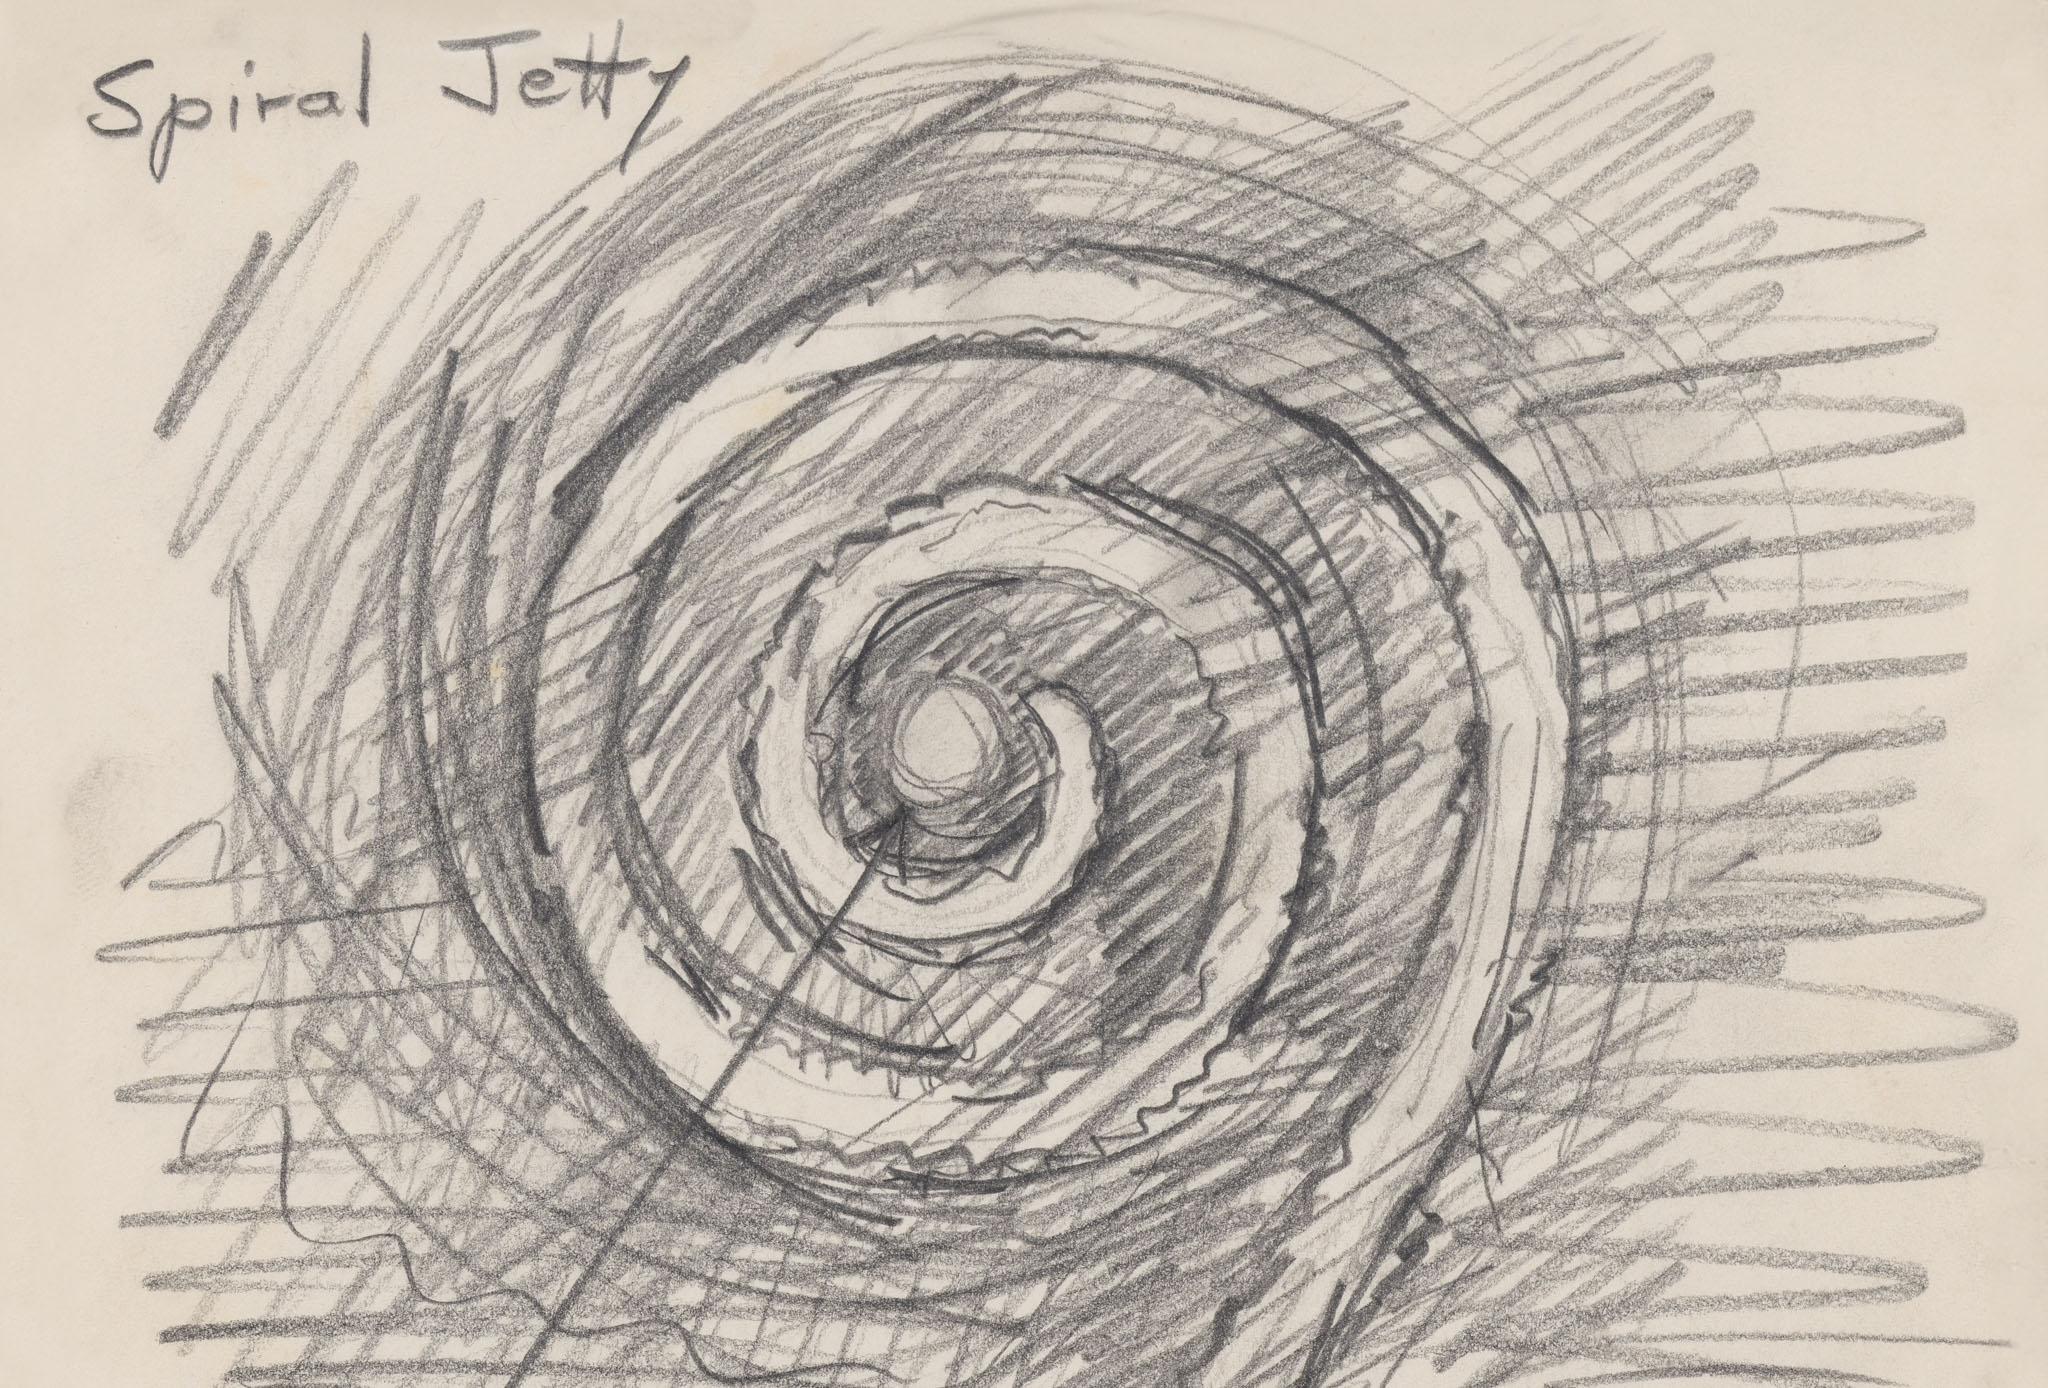 a graphite drawing by Robert Smithson of the Spiral Jetty